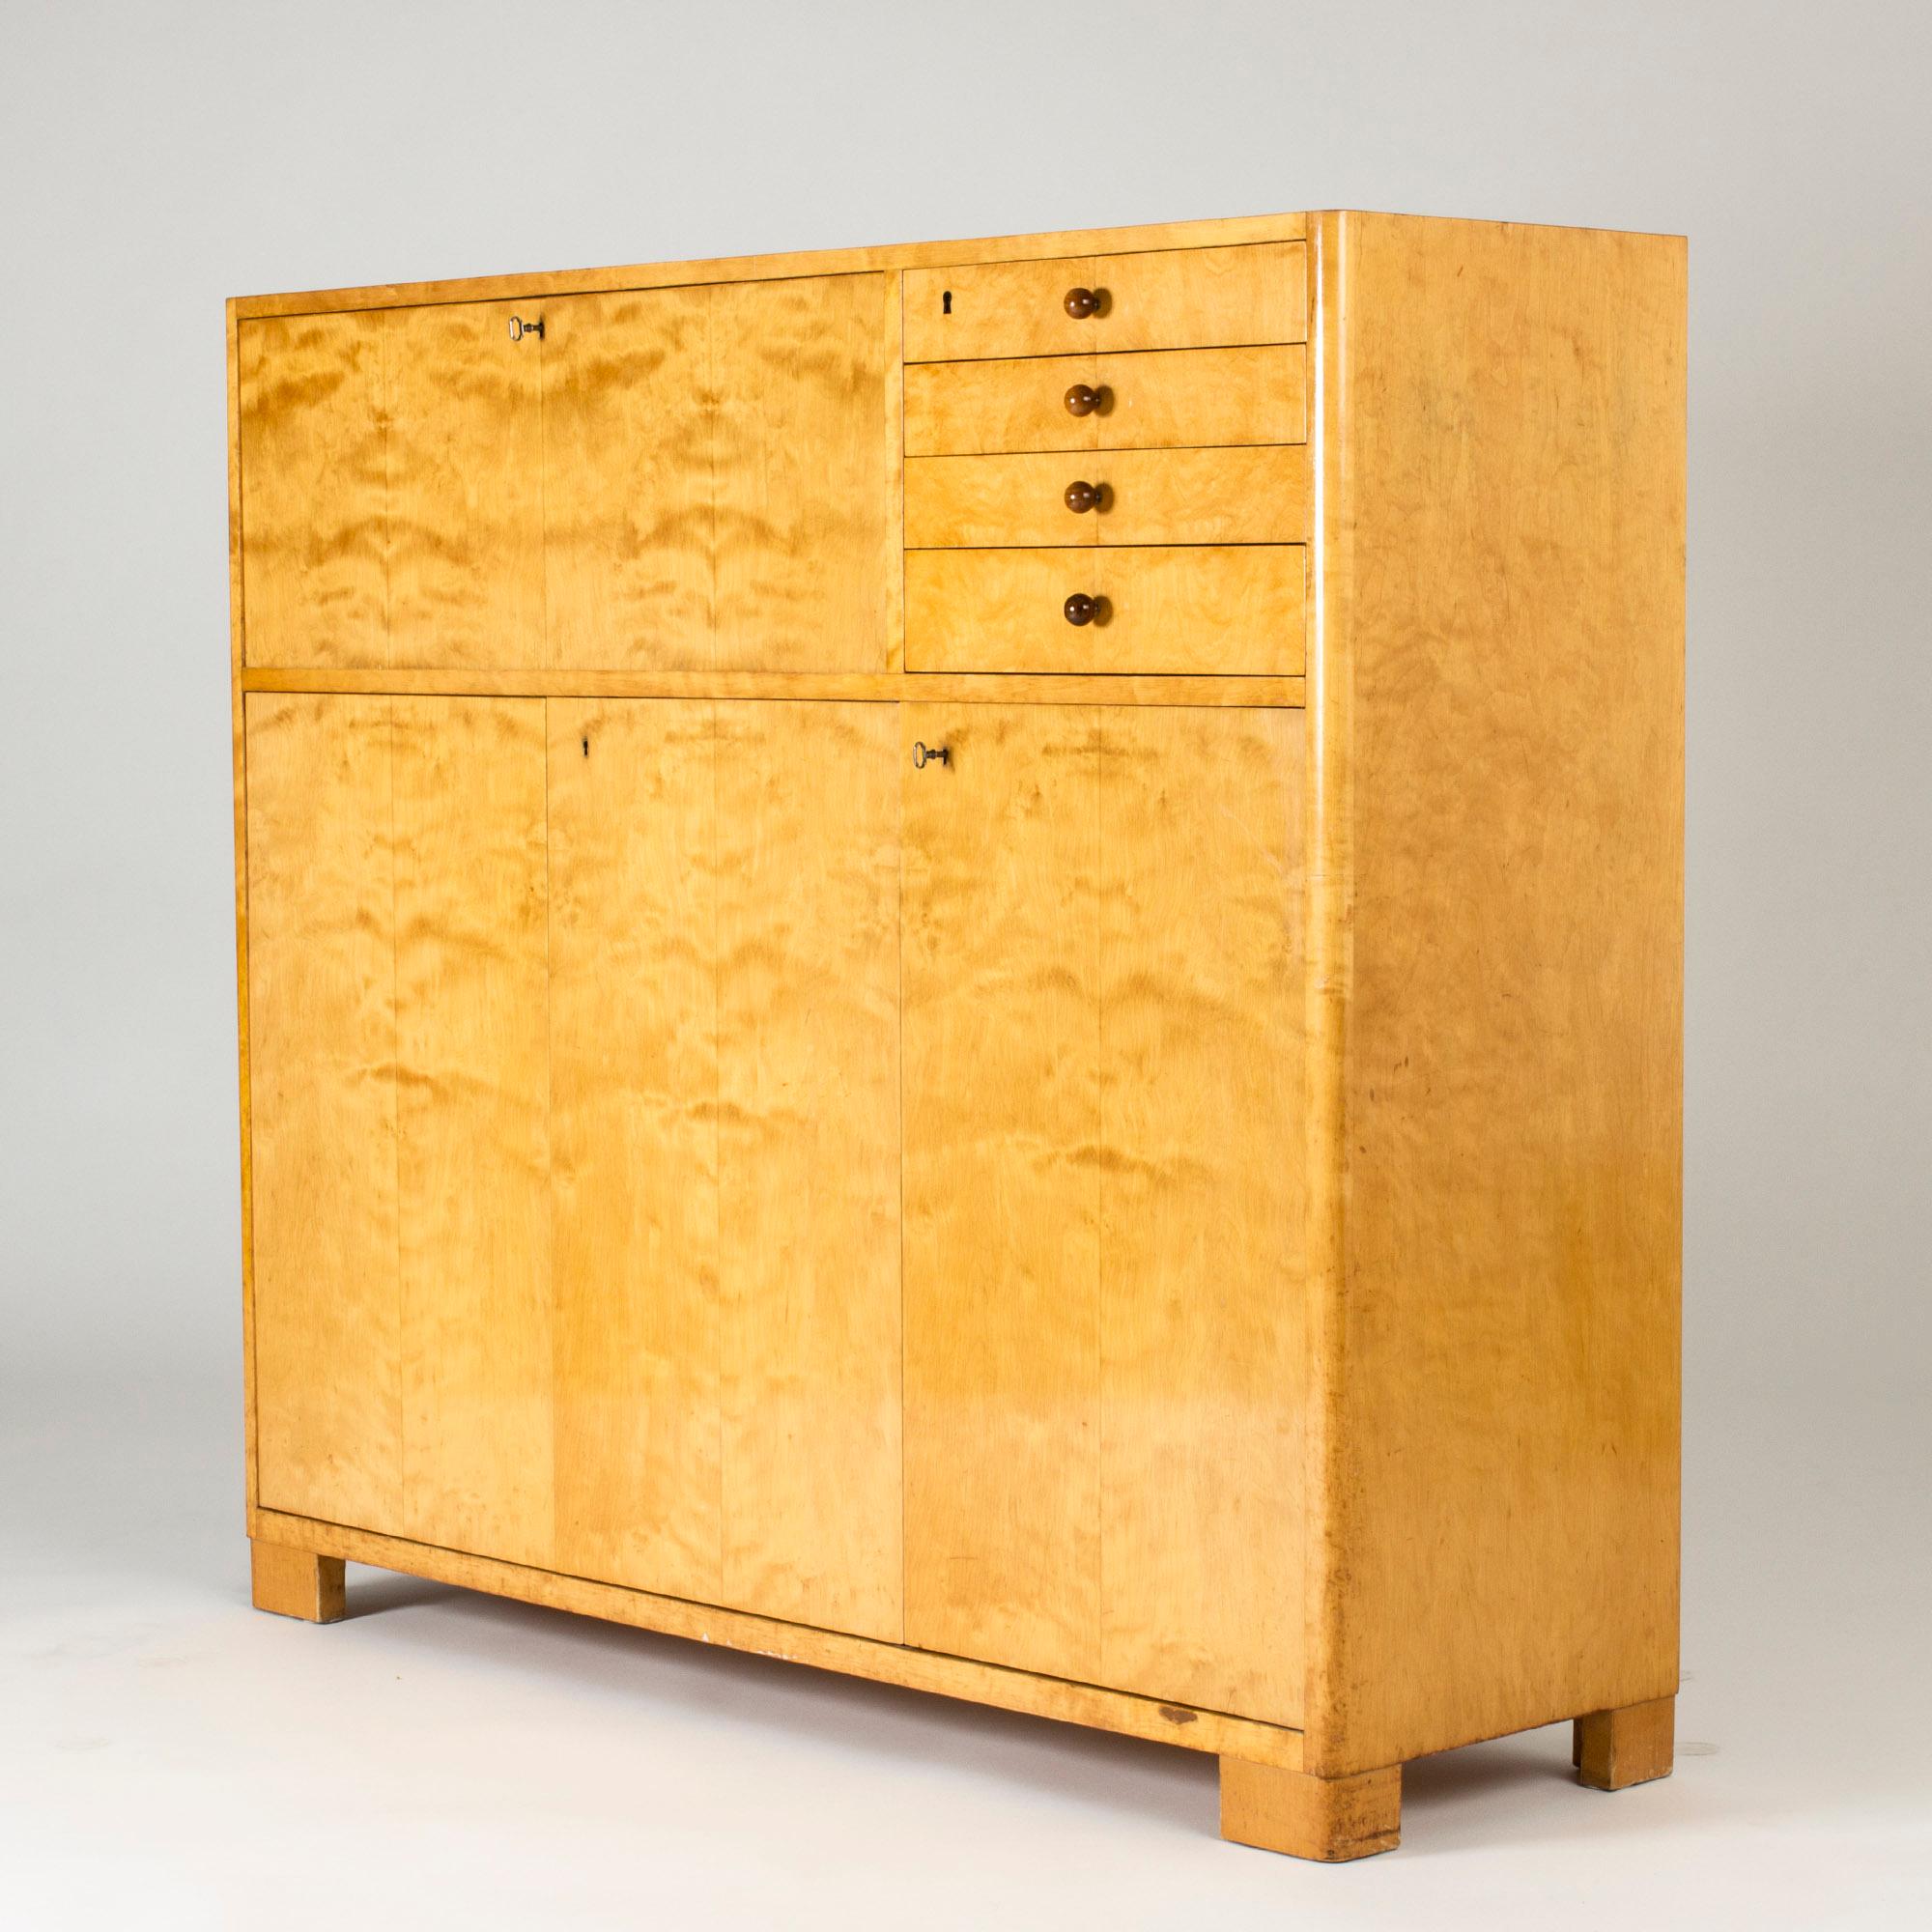 Large birch cabinet by Axel Larsson, in a functionalist design with a clean look. Appealing rounded corners and chunky feet. Nice darker wood ball-shaped handles on the drawers.